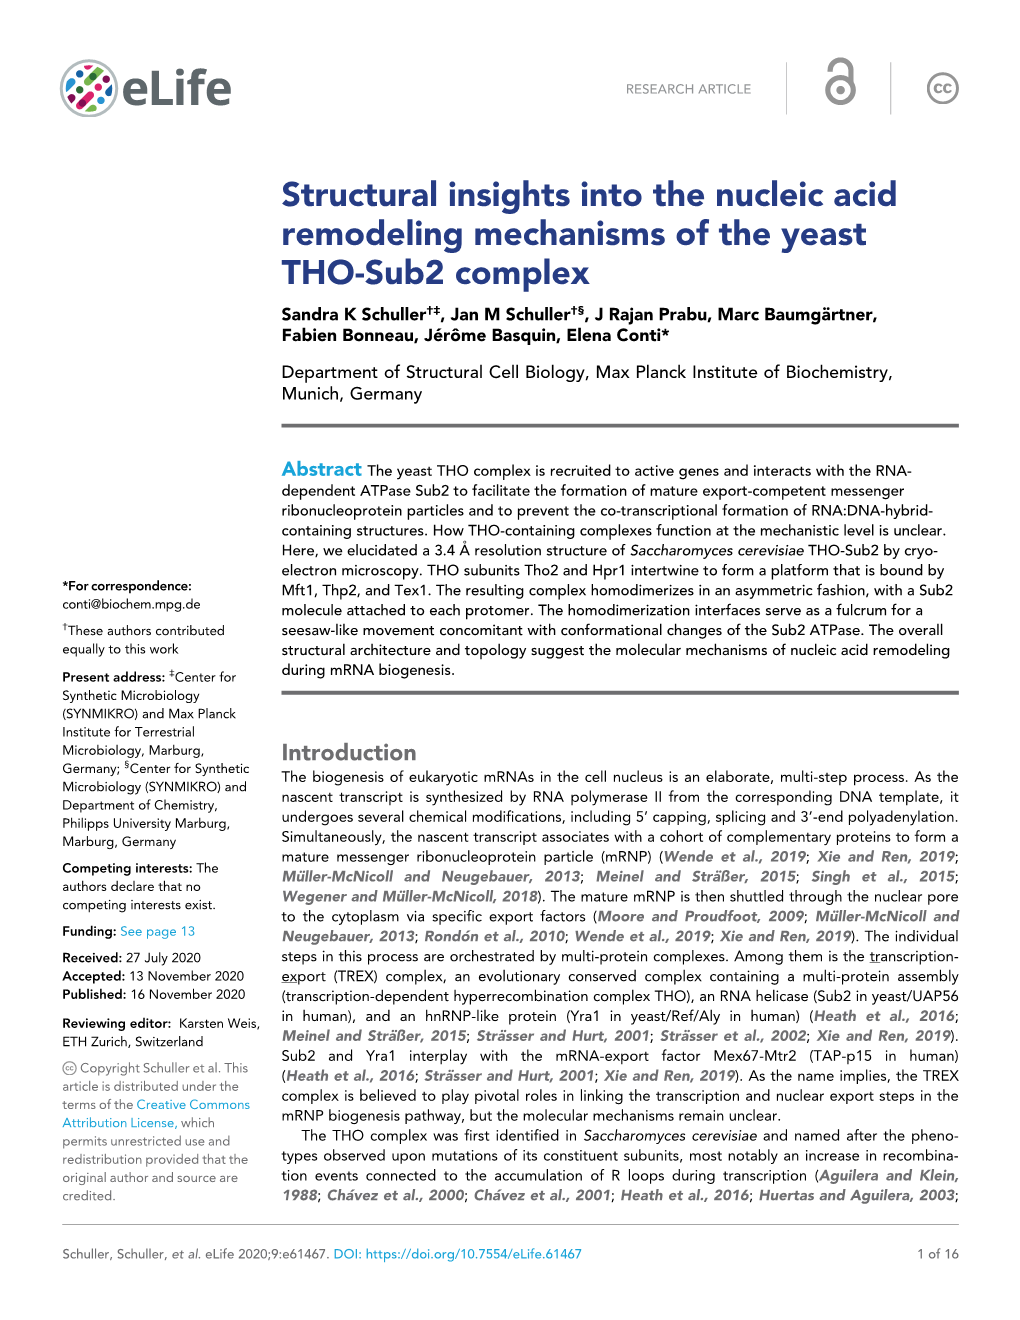 Structural Insights Into the Nucleic Acid Remodeling Mechanisms of The